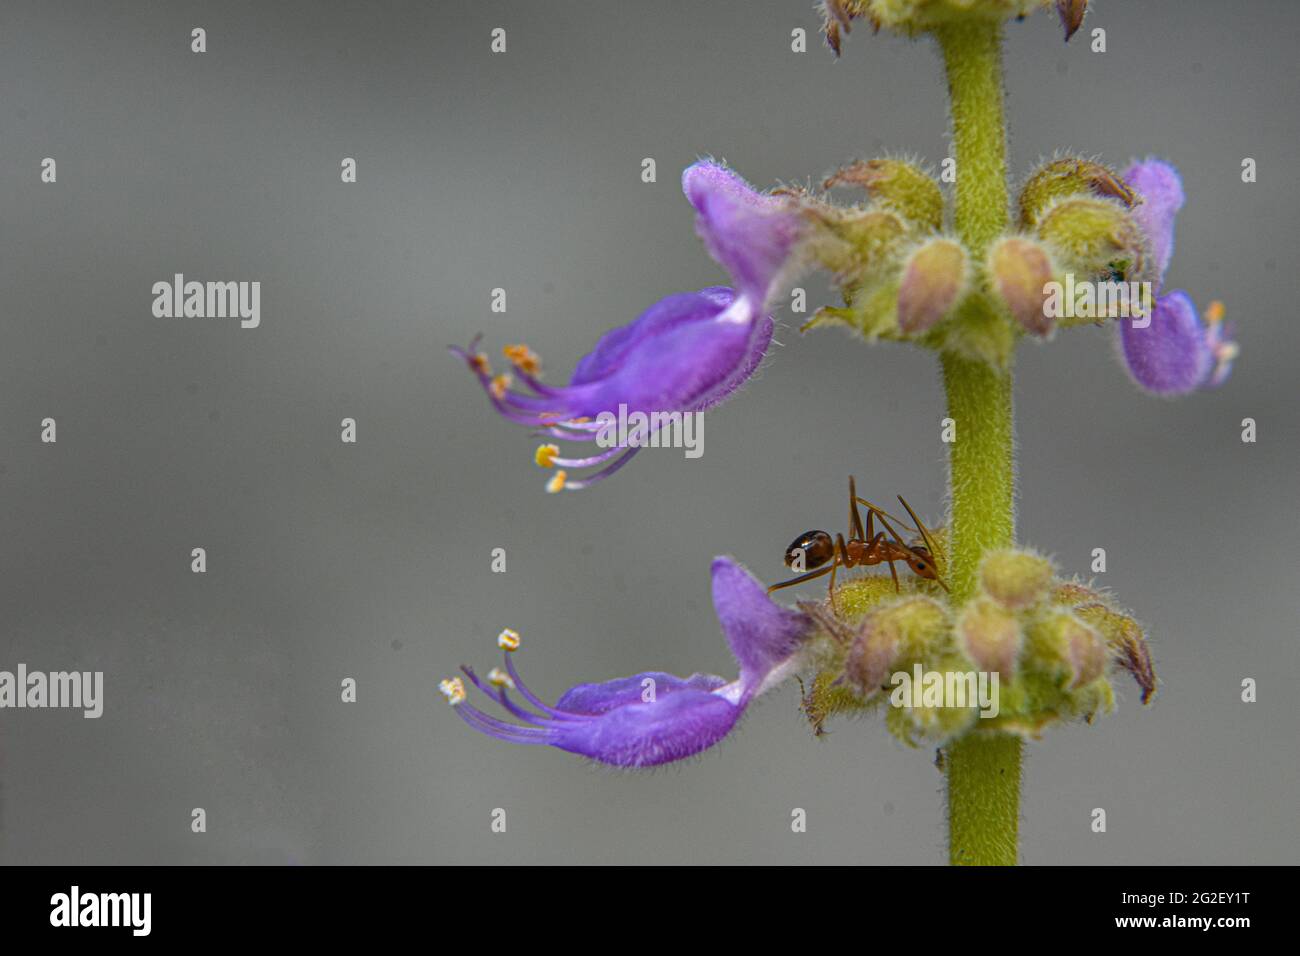 Macro view Plectranthus amboinicus, commonly known as oregano, purple flower and buds , an ant on the buds. Stock Photo